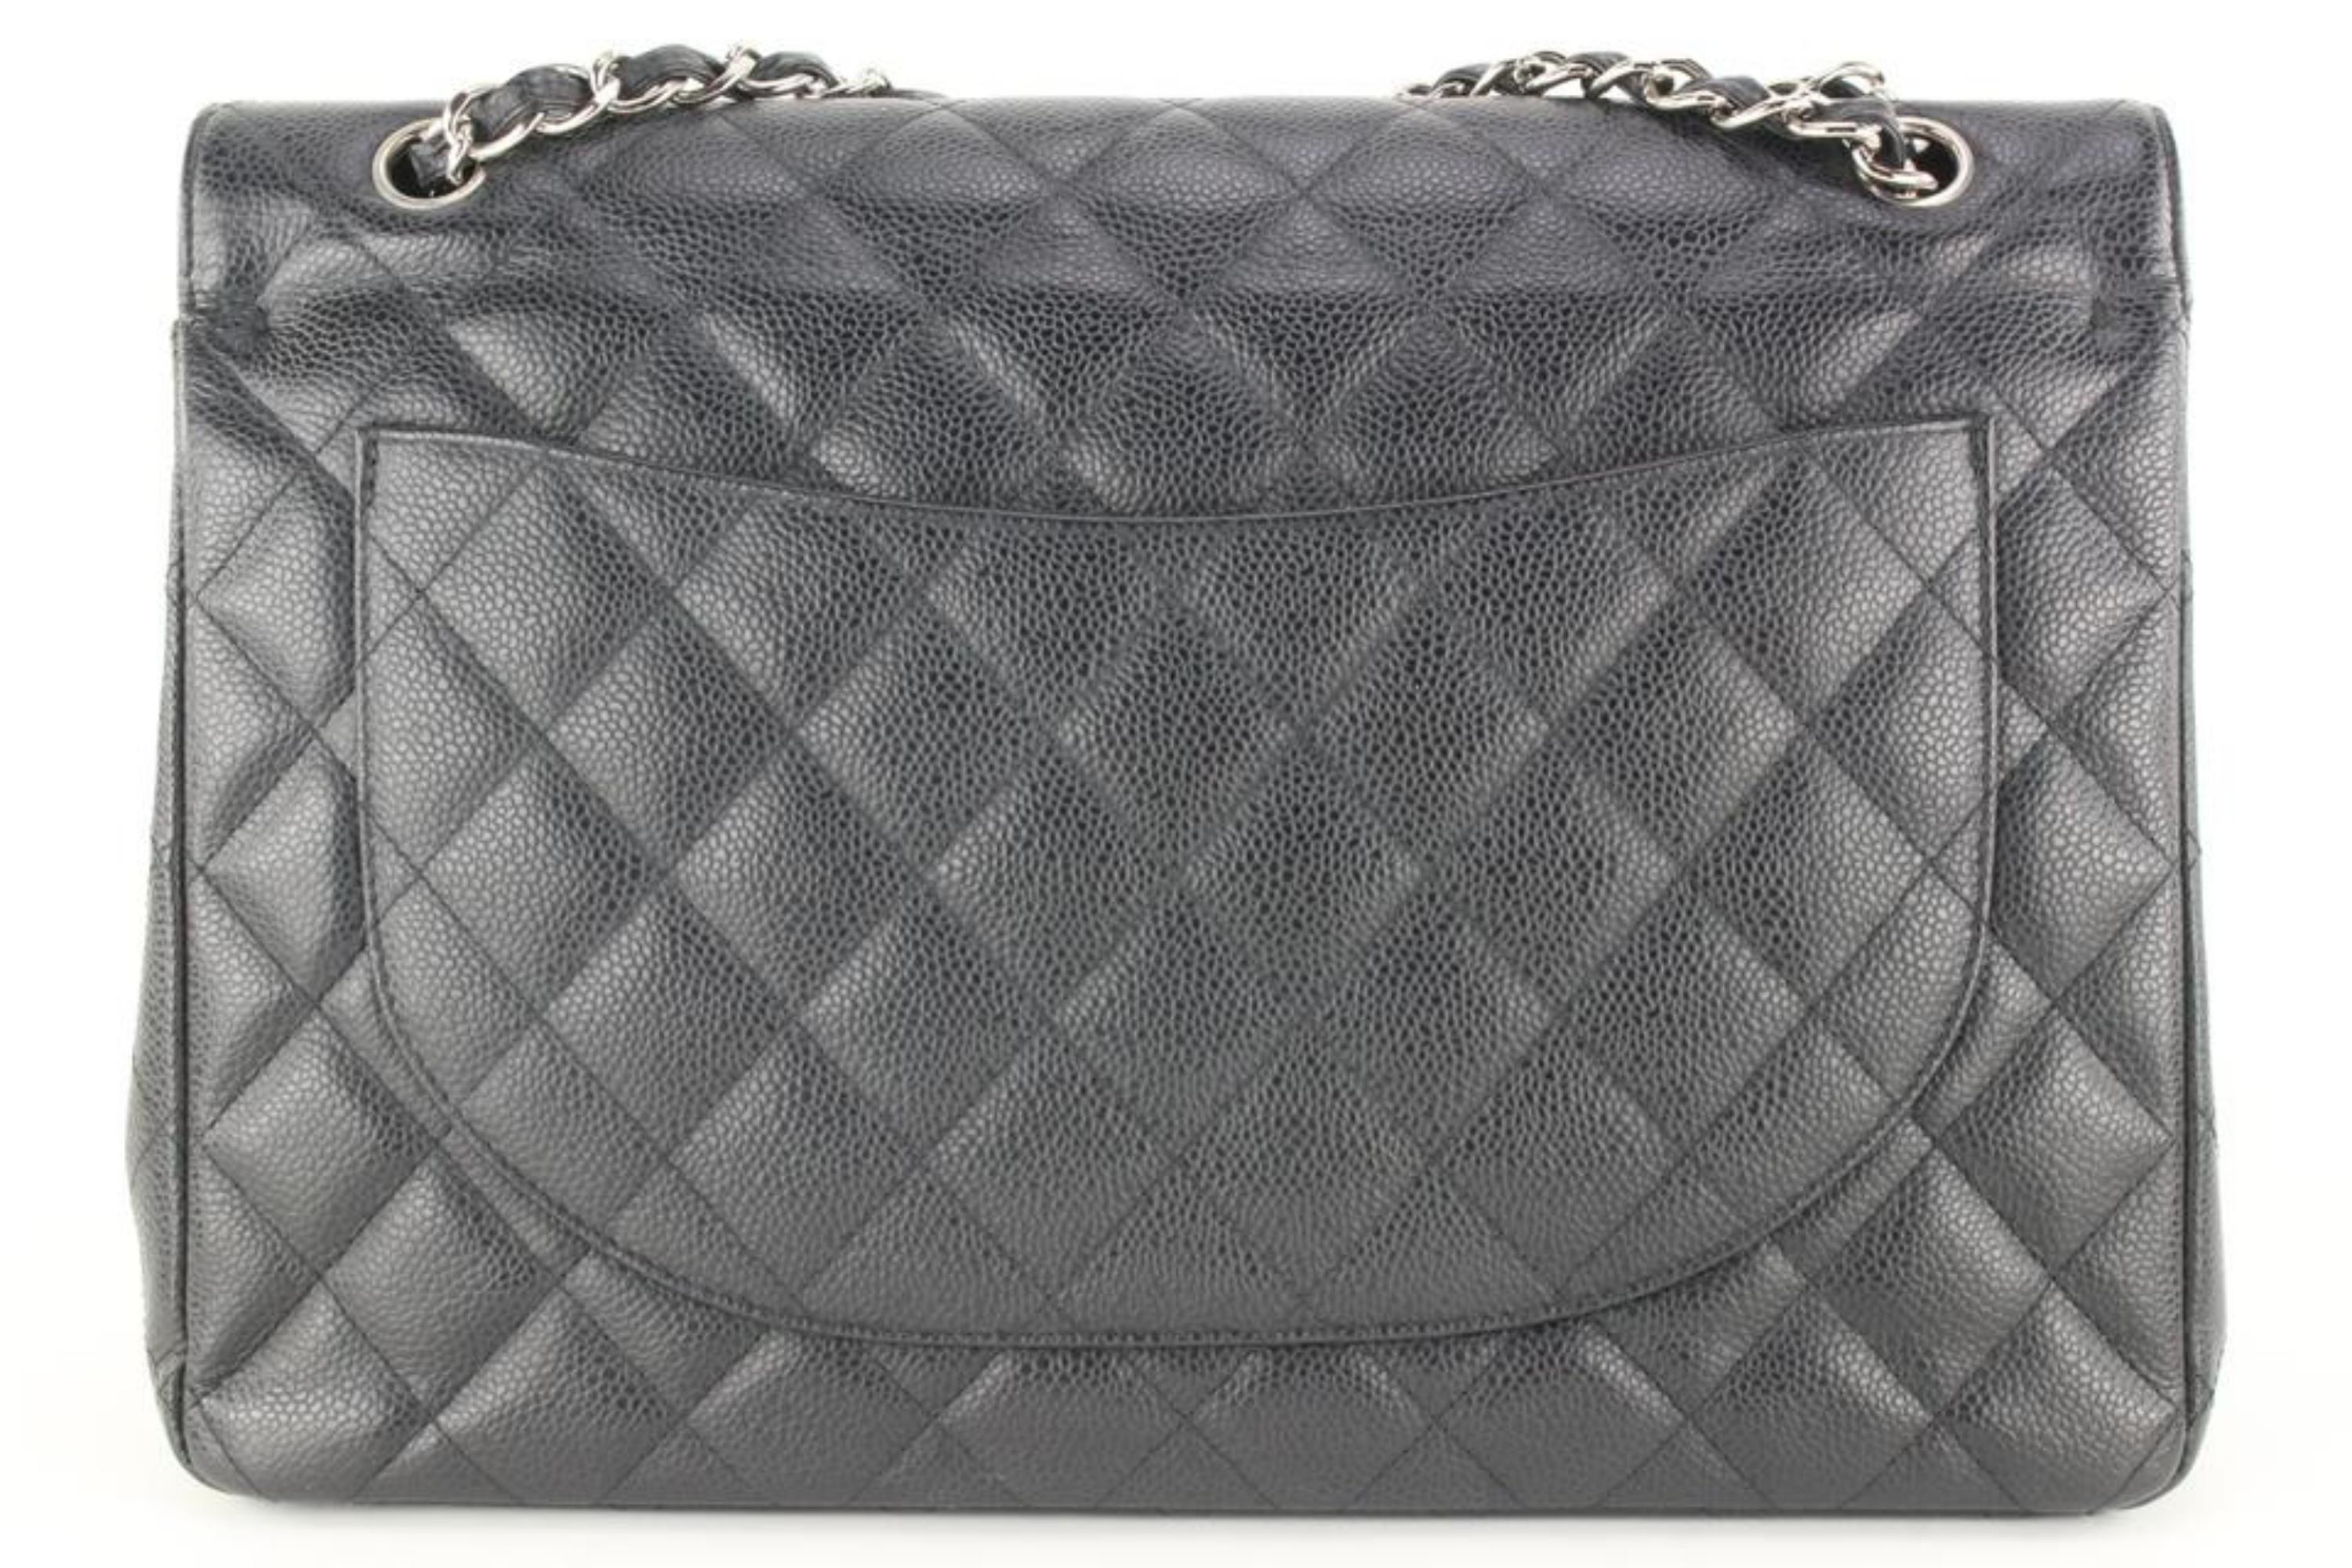 Chanel Black Quilted Caviar Leather Maxi Double Flap SHW 1CJ1028 2